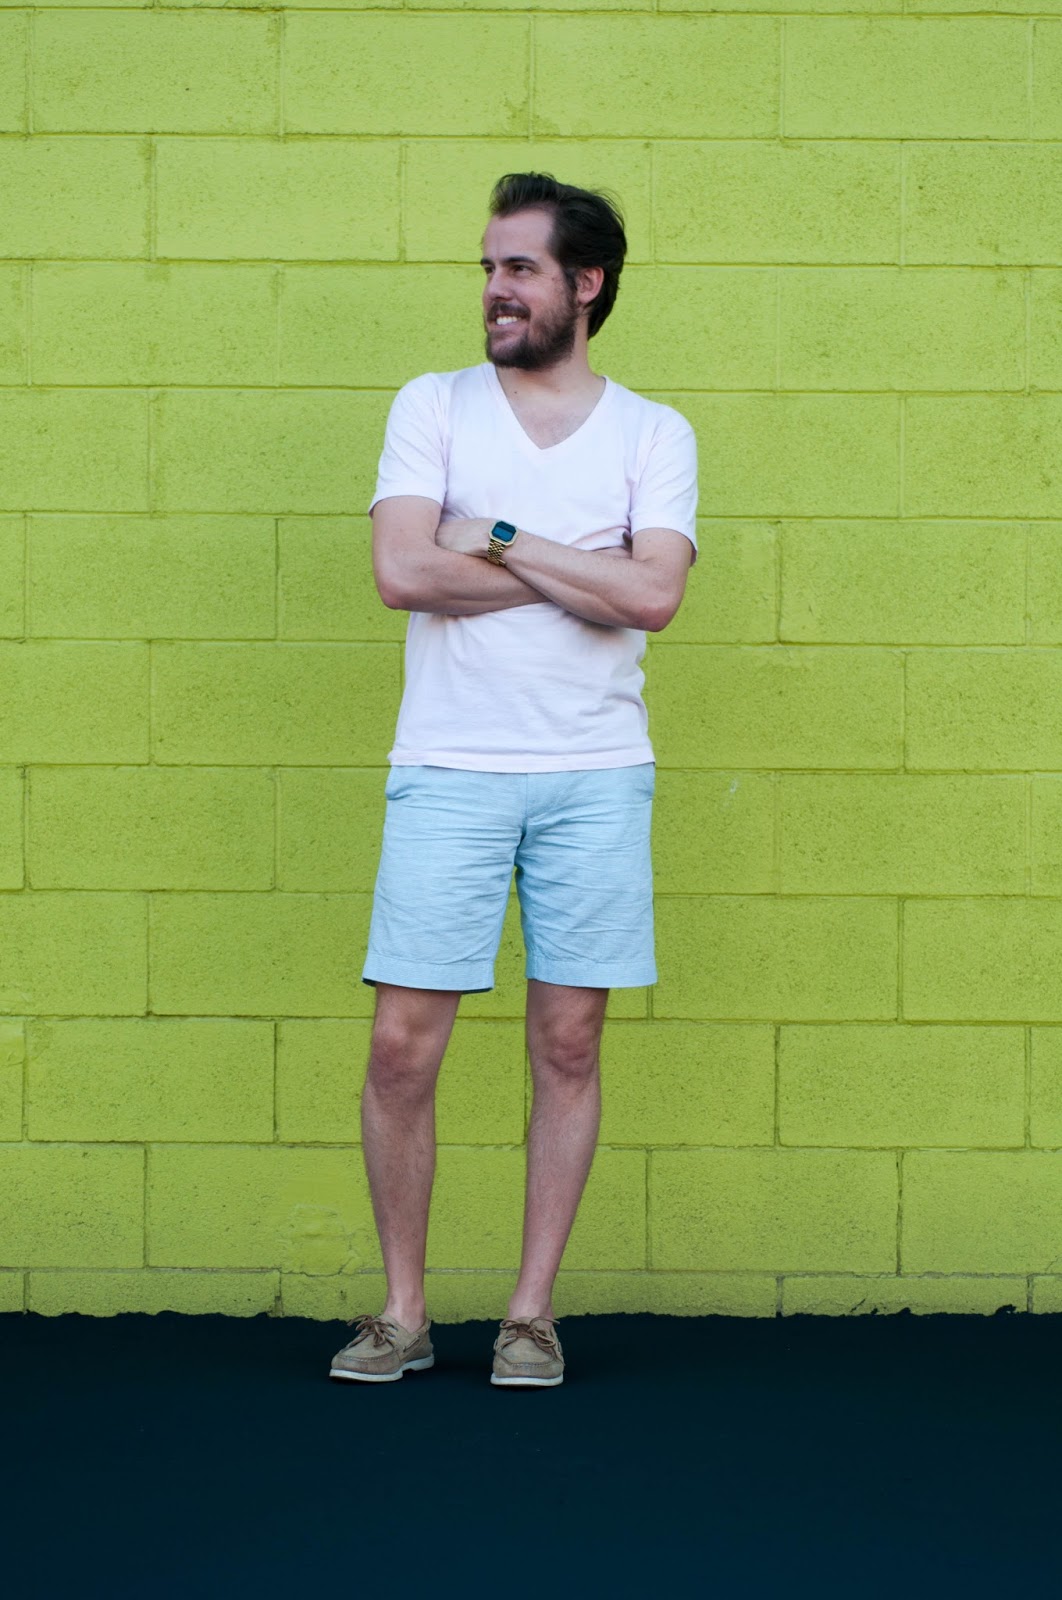 mens fashion, mens style, jcrew stanton short, sperry topsider boat shoes, american apparel v neck, ootd